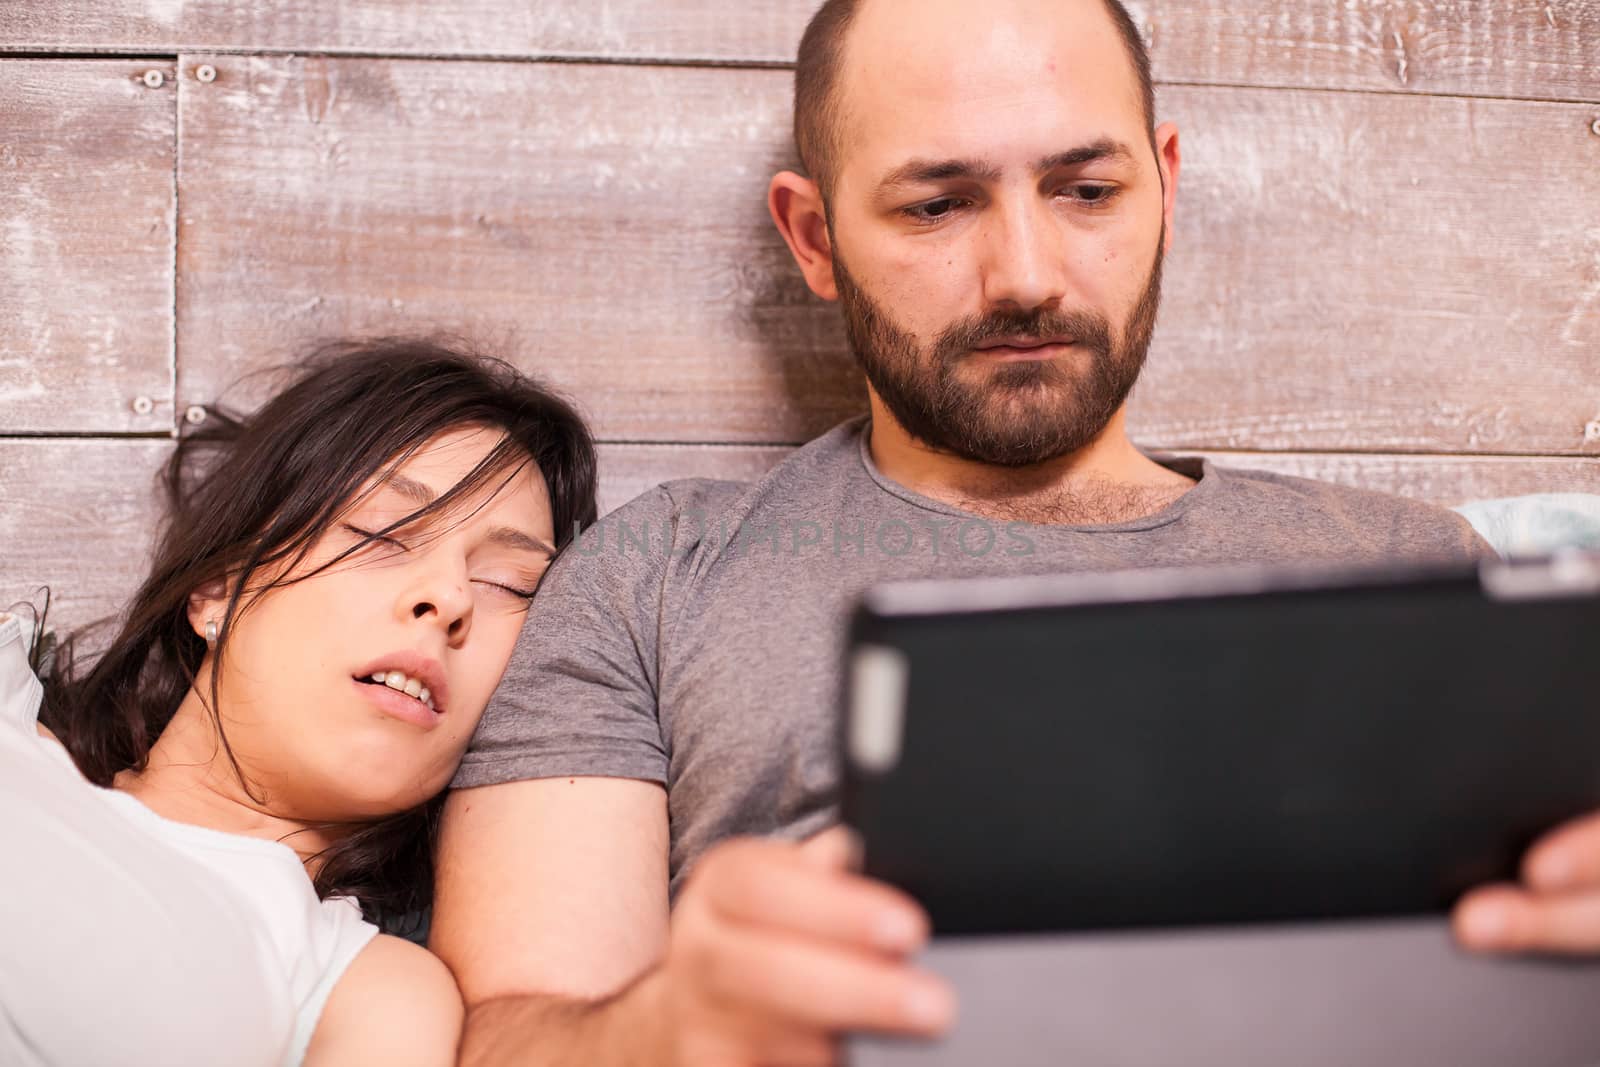 Beautiful wife sleeping on her husband husband while he is working late on tablet computer.